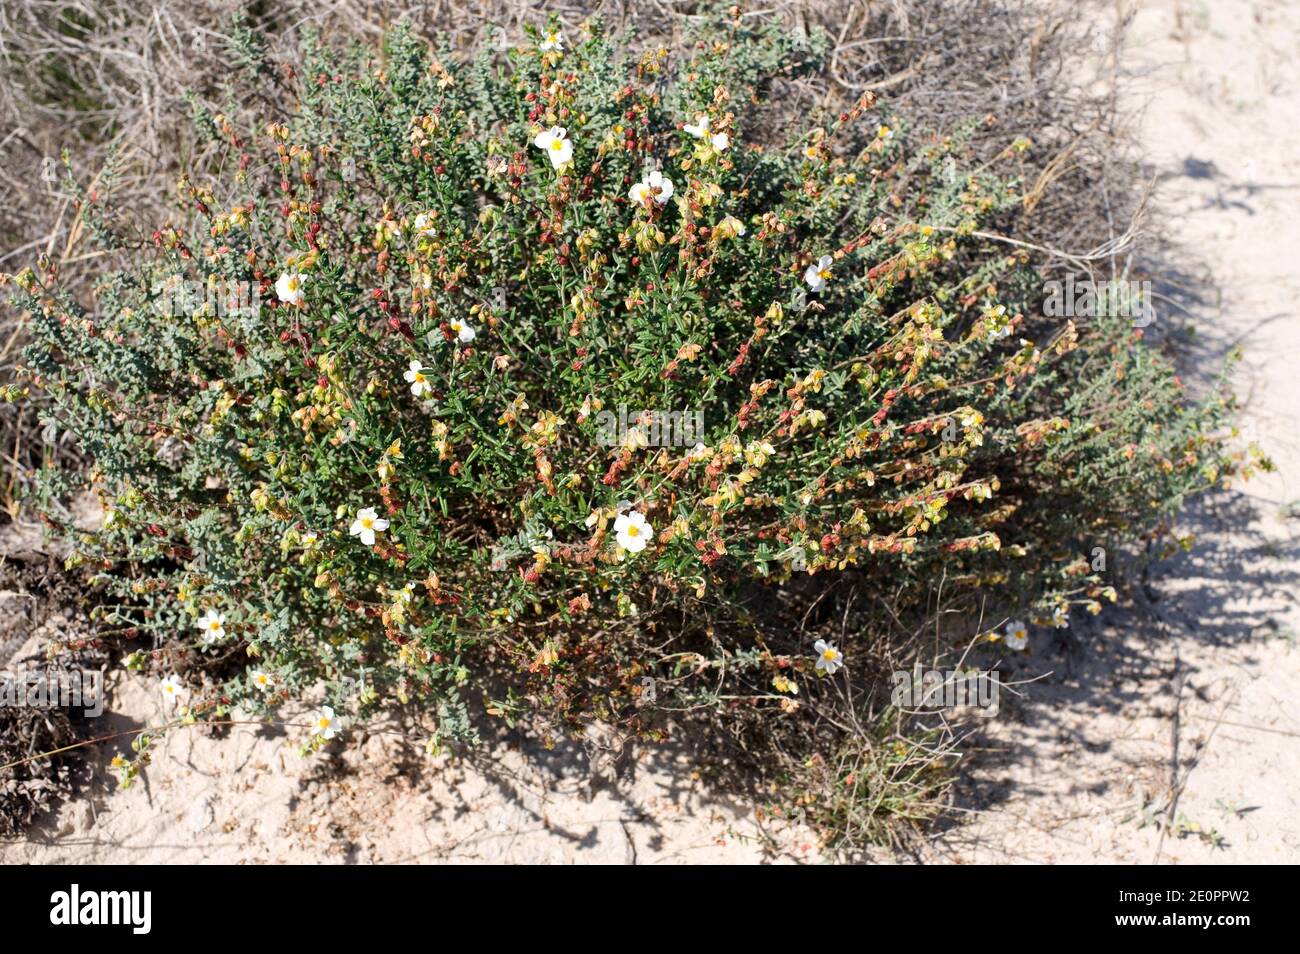 Tamarilla del Mar Menor (Helianthemum marminorense) is an endemic shrub native to Calnegre and San Pedro del Pinatar (Murcia) and the south of Stock Photo